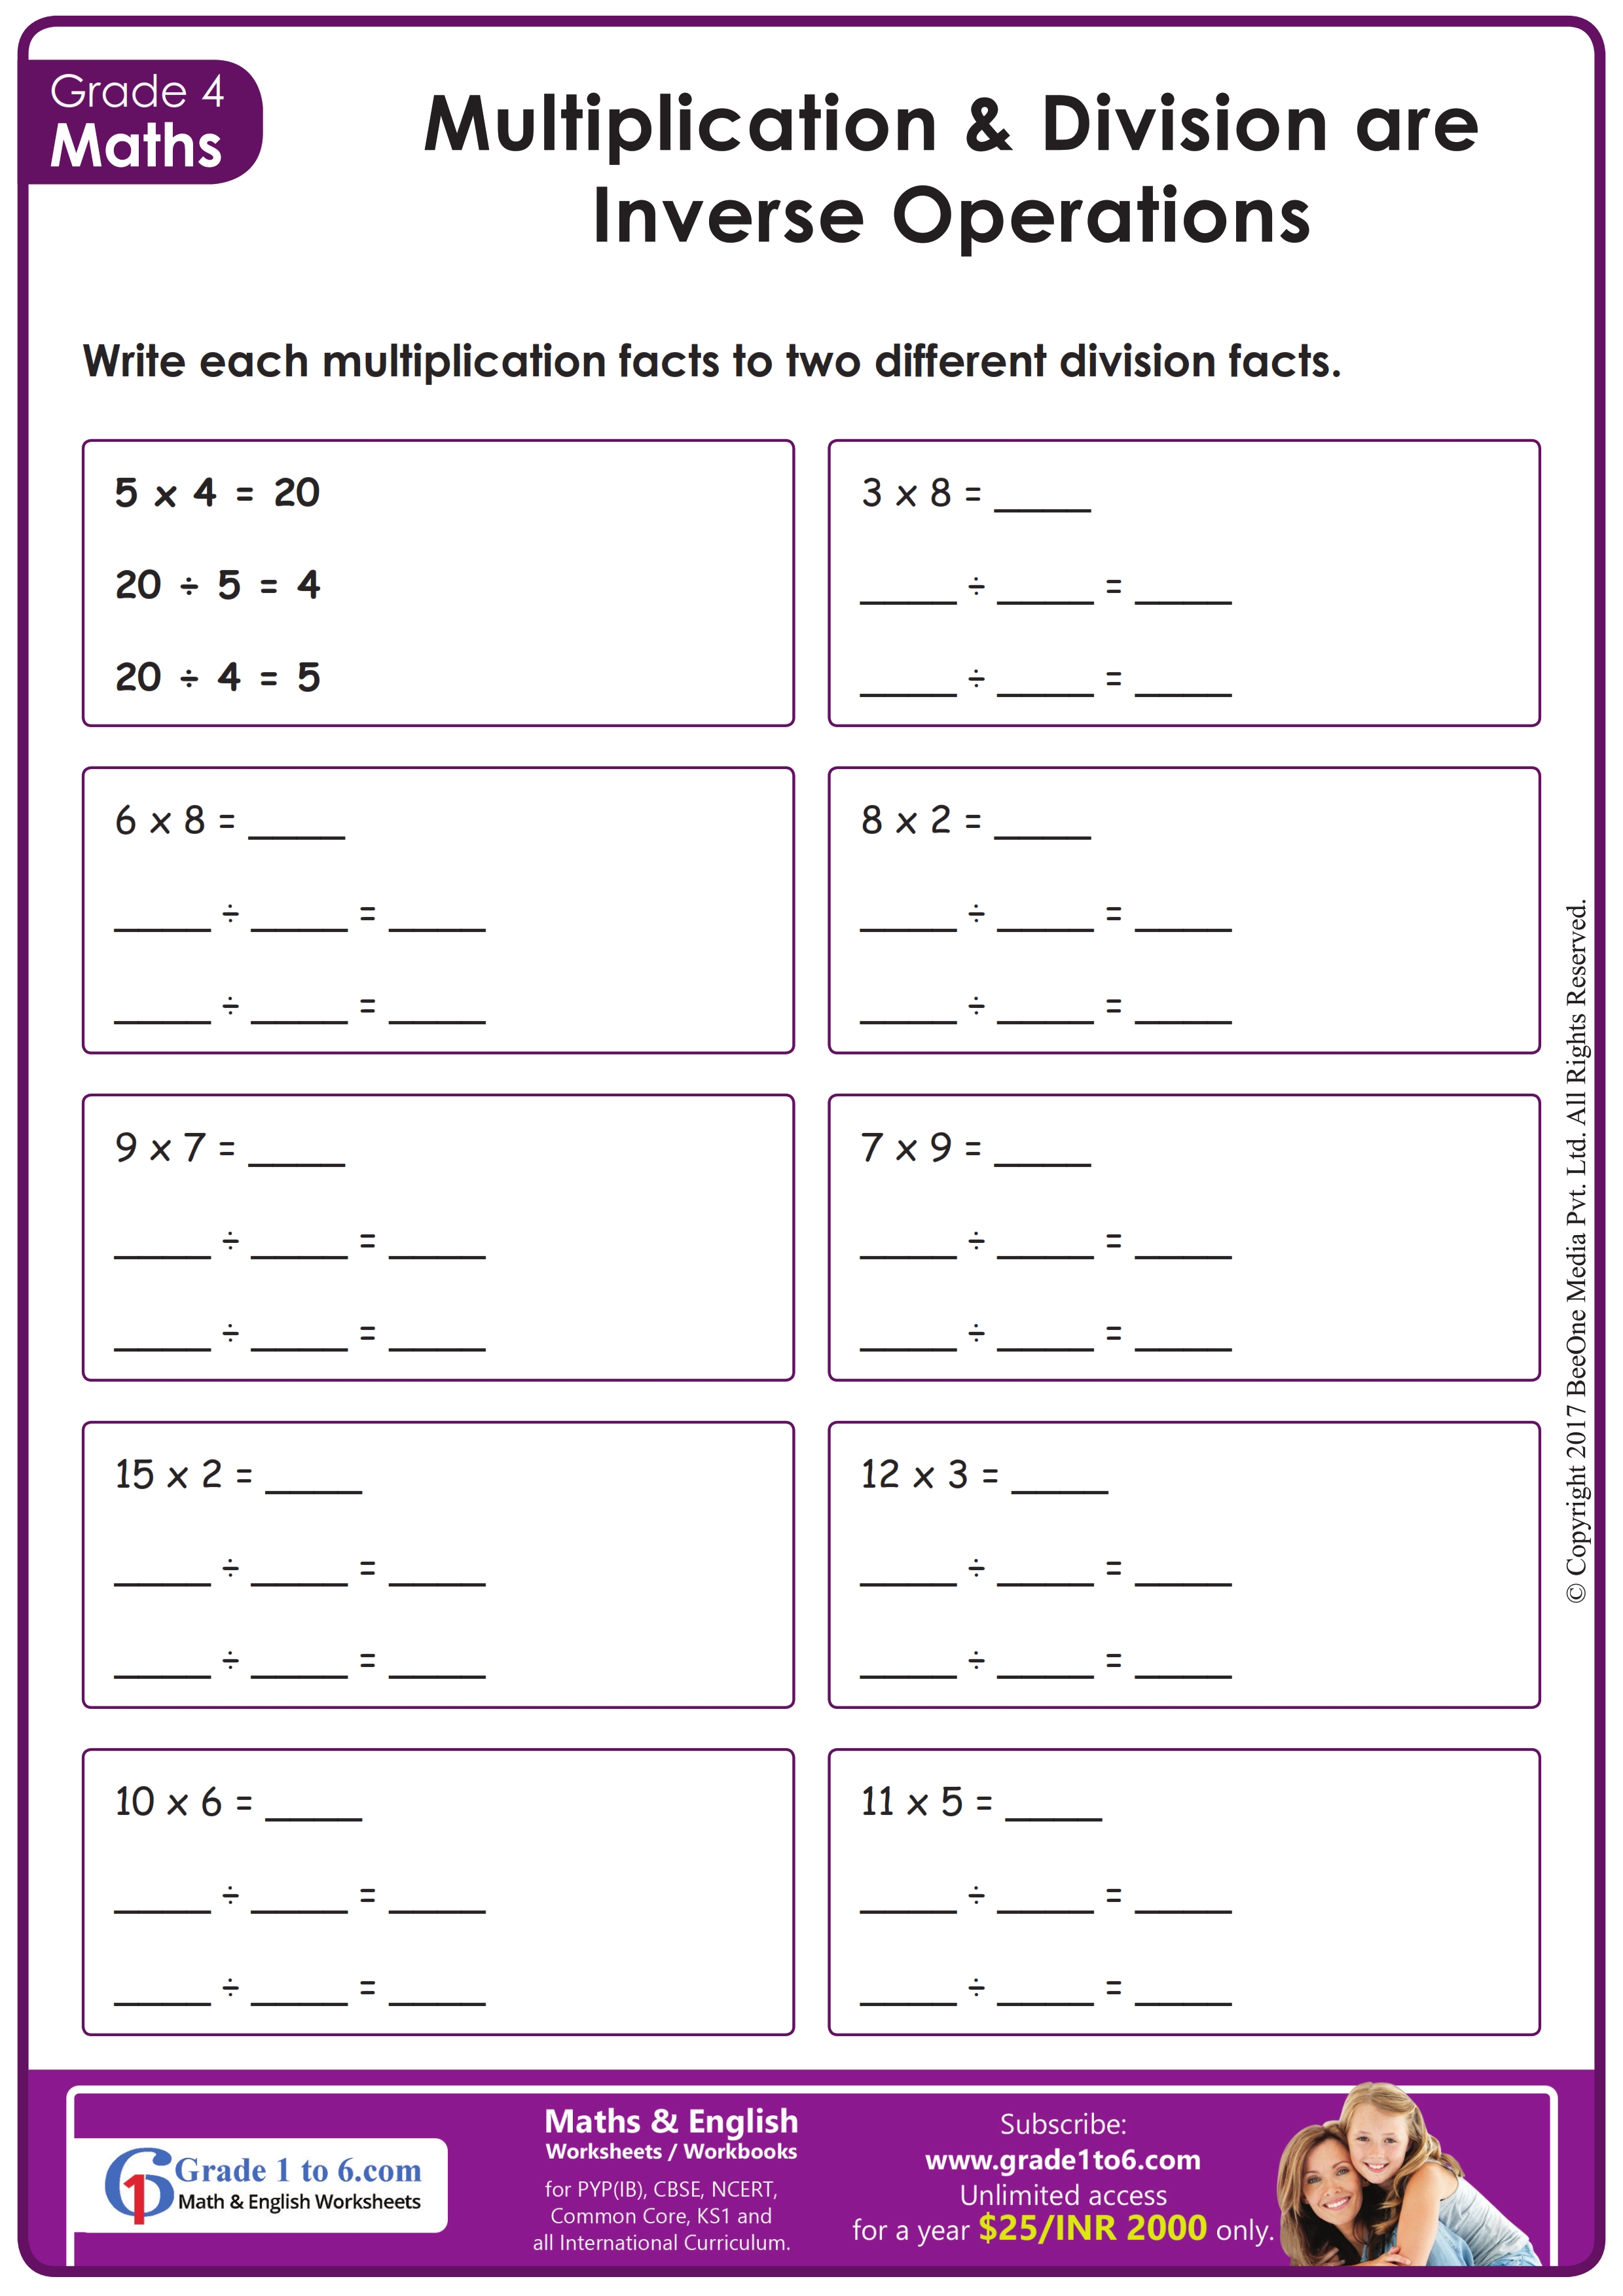 Multiplication Division Inverse Operations Grade1to6